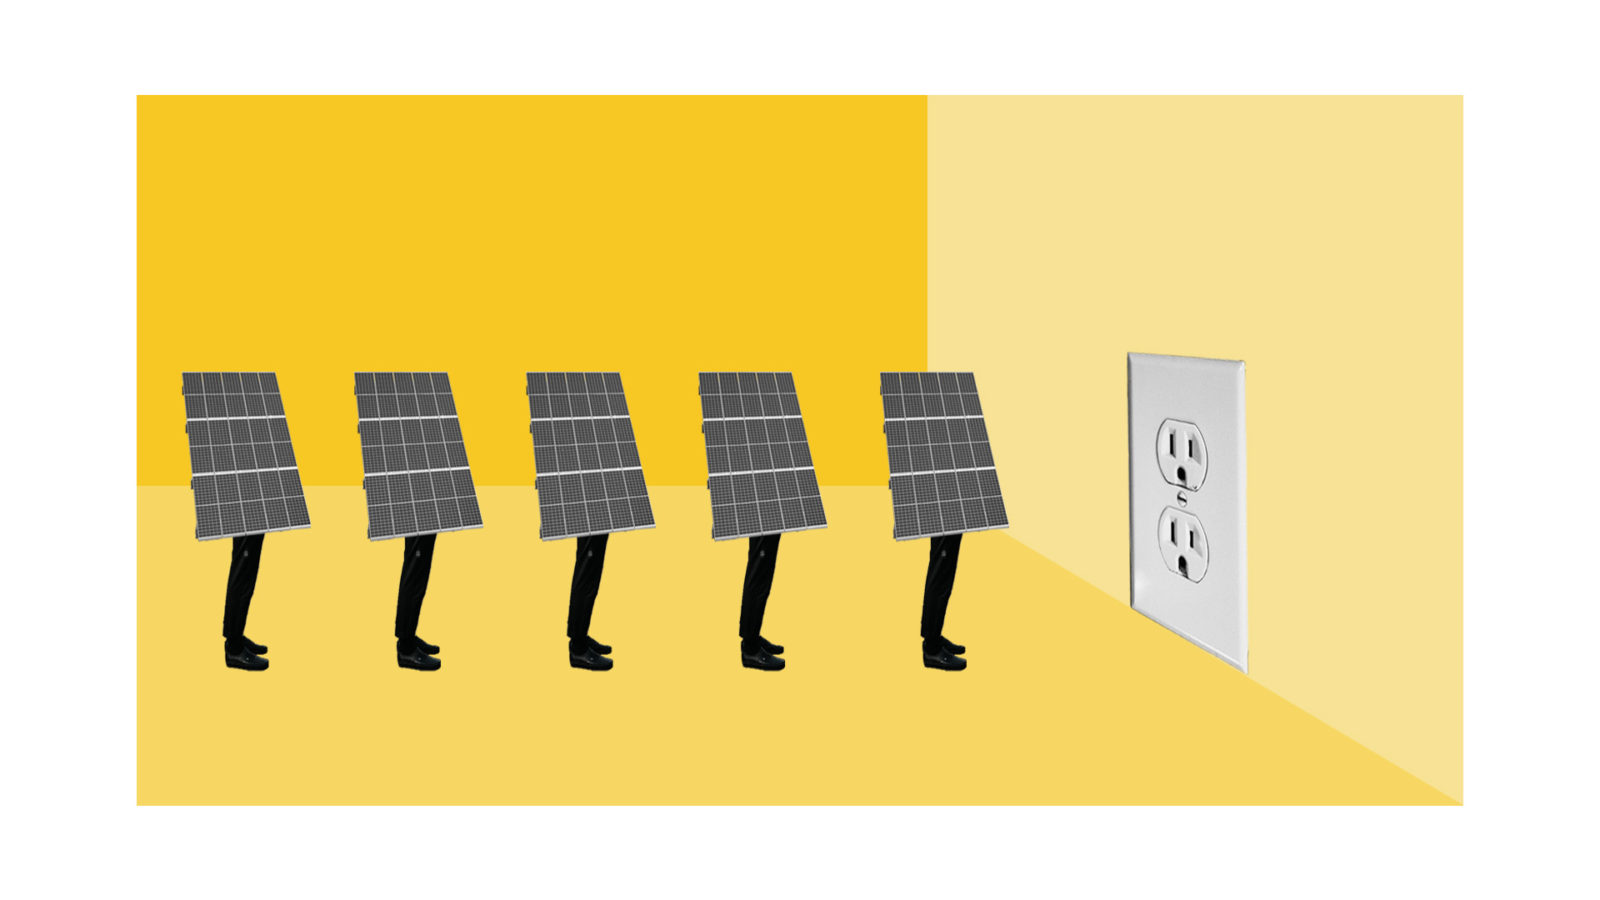 Image of solar panels with legs standing in line waiting to be plugged into an outlet to symbolize interconnection standards.